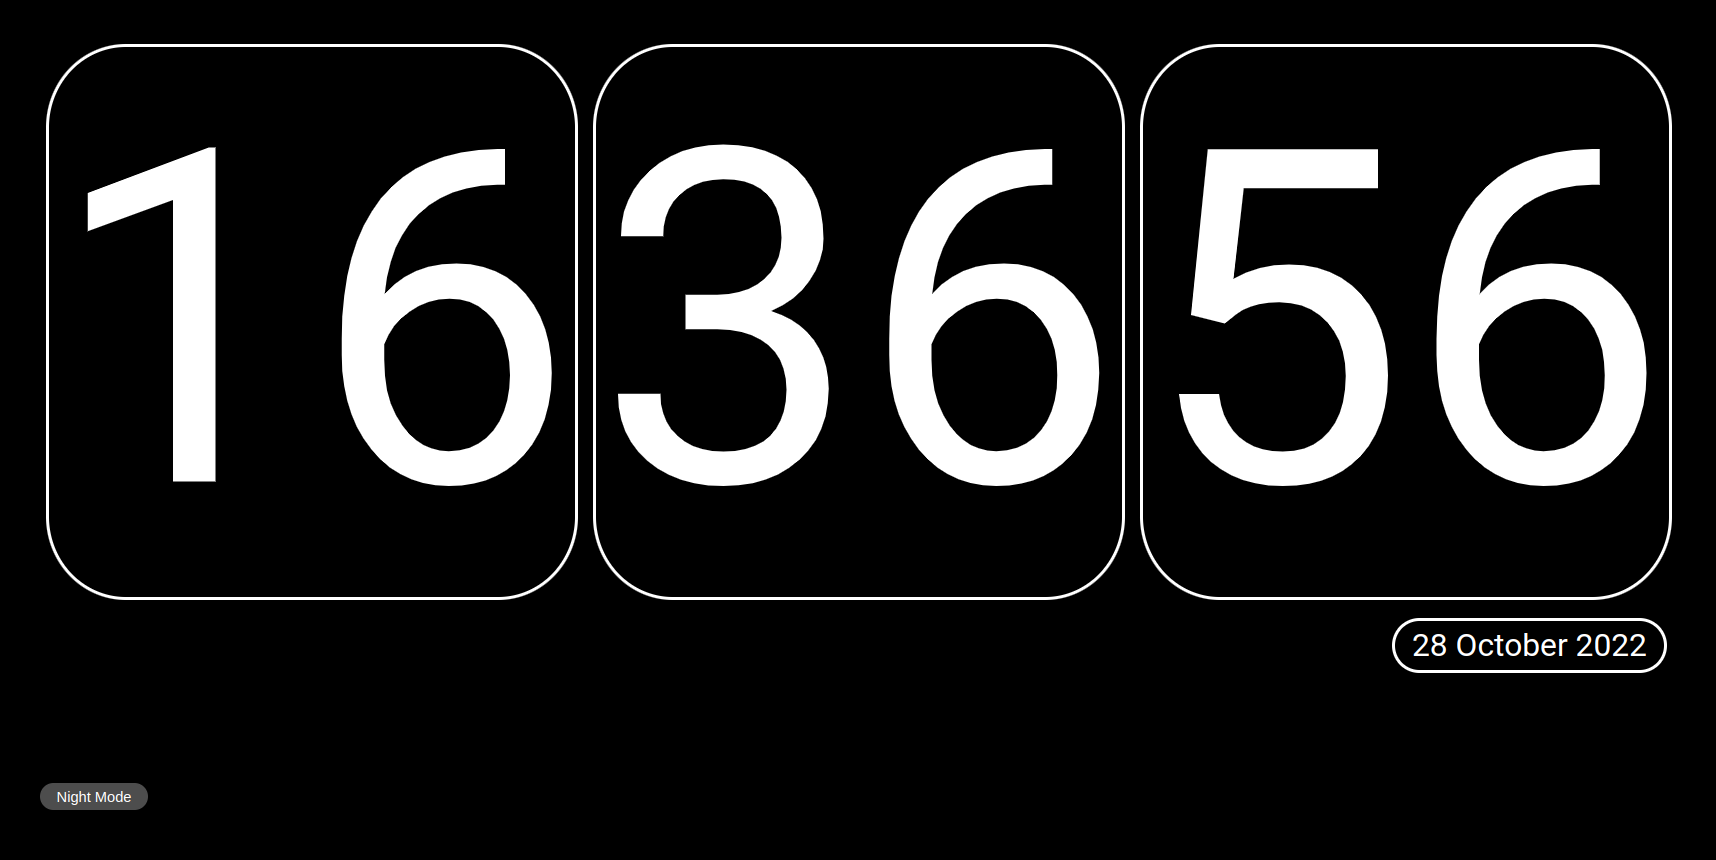 Screenshot of the main window of the digital clock app. A six digit digital clock, displaying hours, minutes, and seconds at 16 36 56, with the date bellow at 28th October 2022.